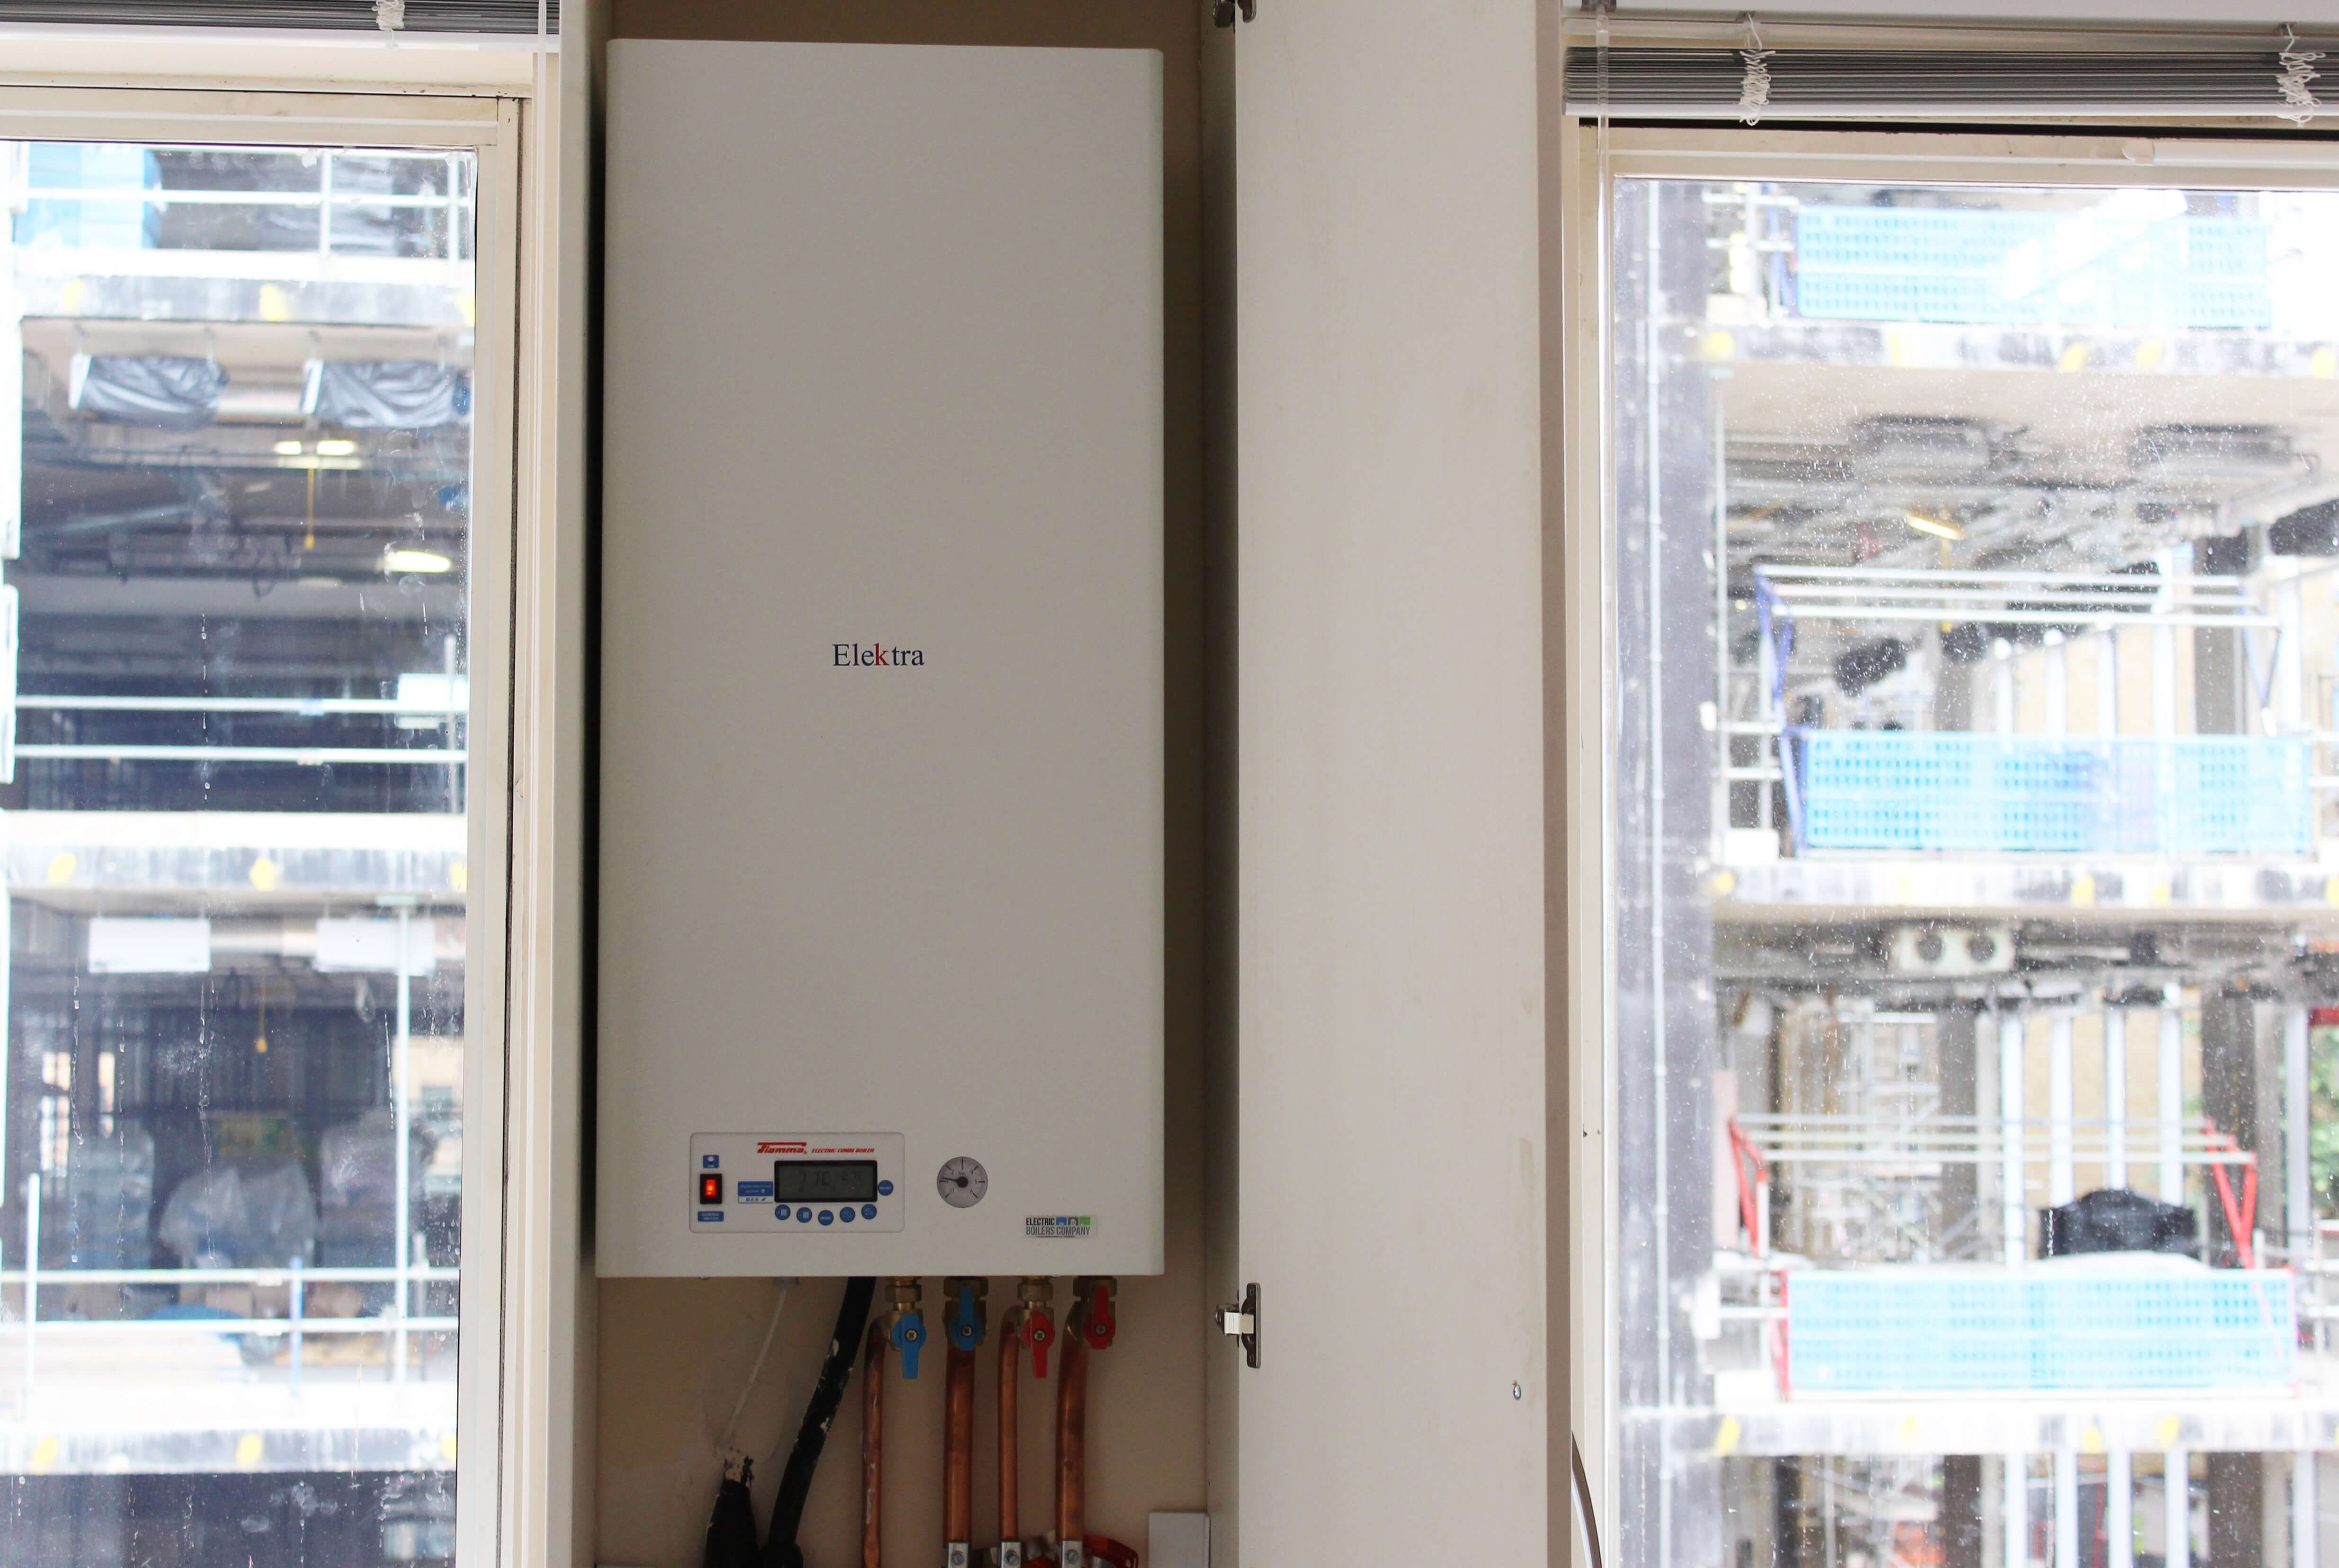 Buy Electric Combi Boilers and Electric Central Heating boilers in the UK